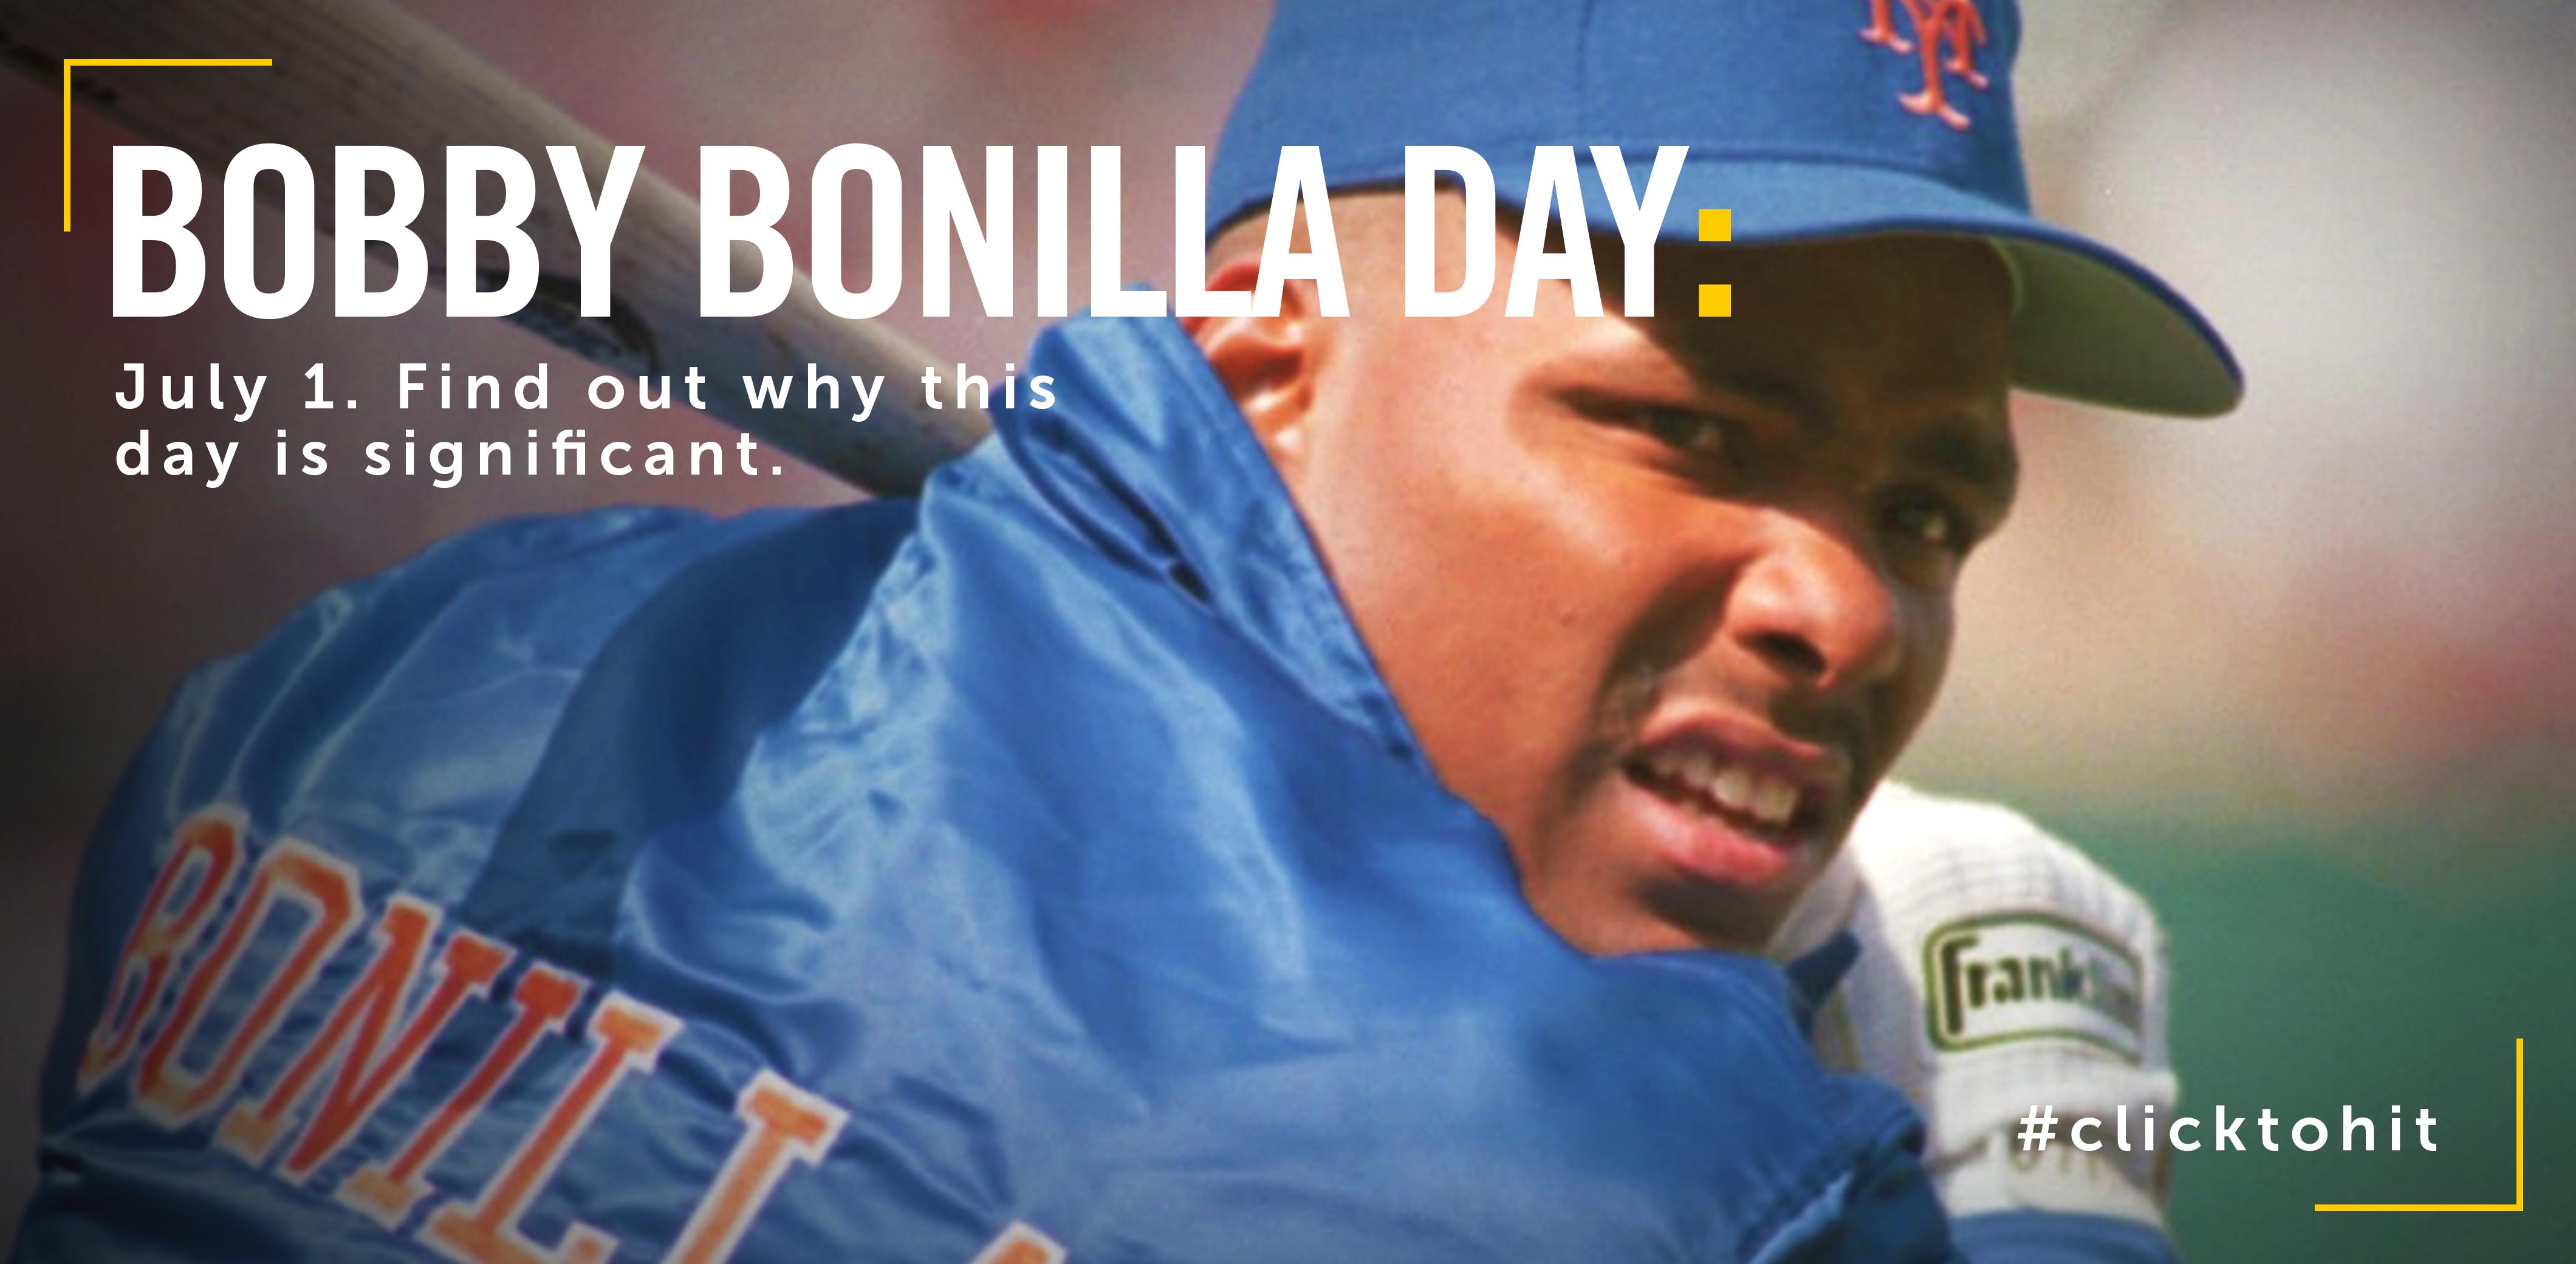 What is Bobby Bonilla Day